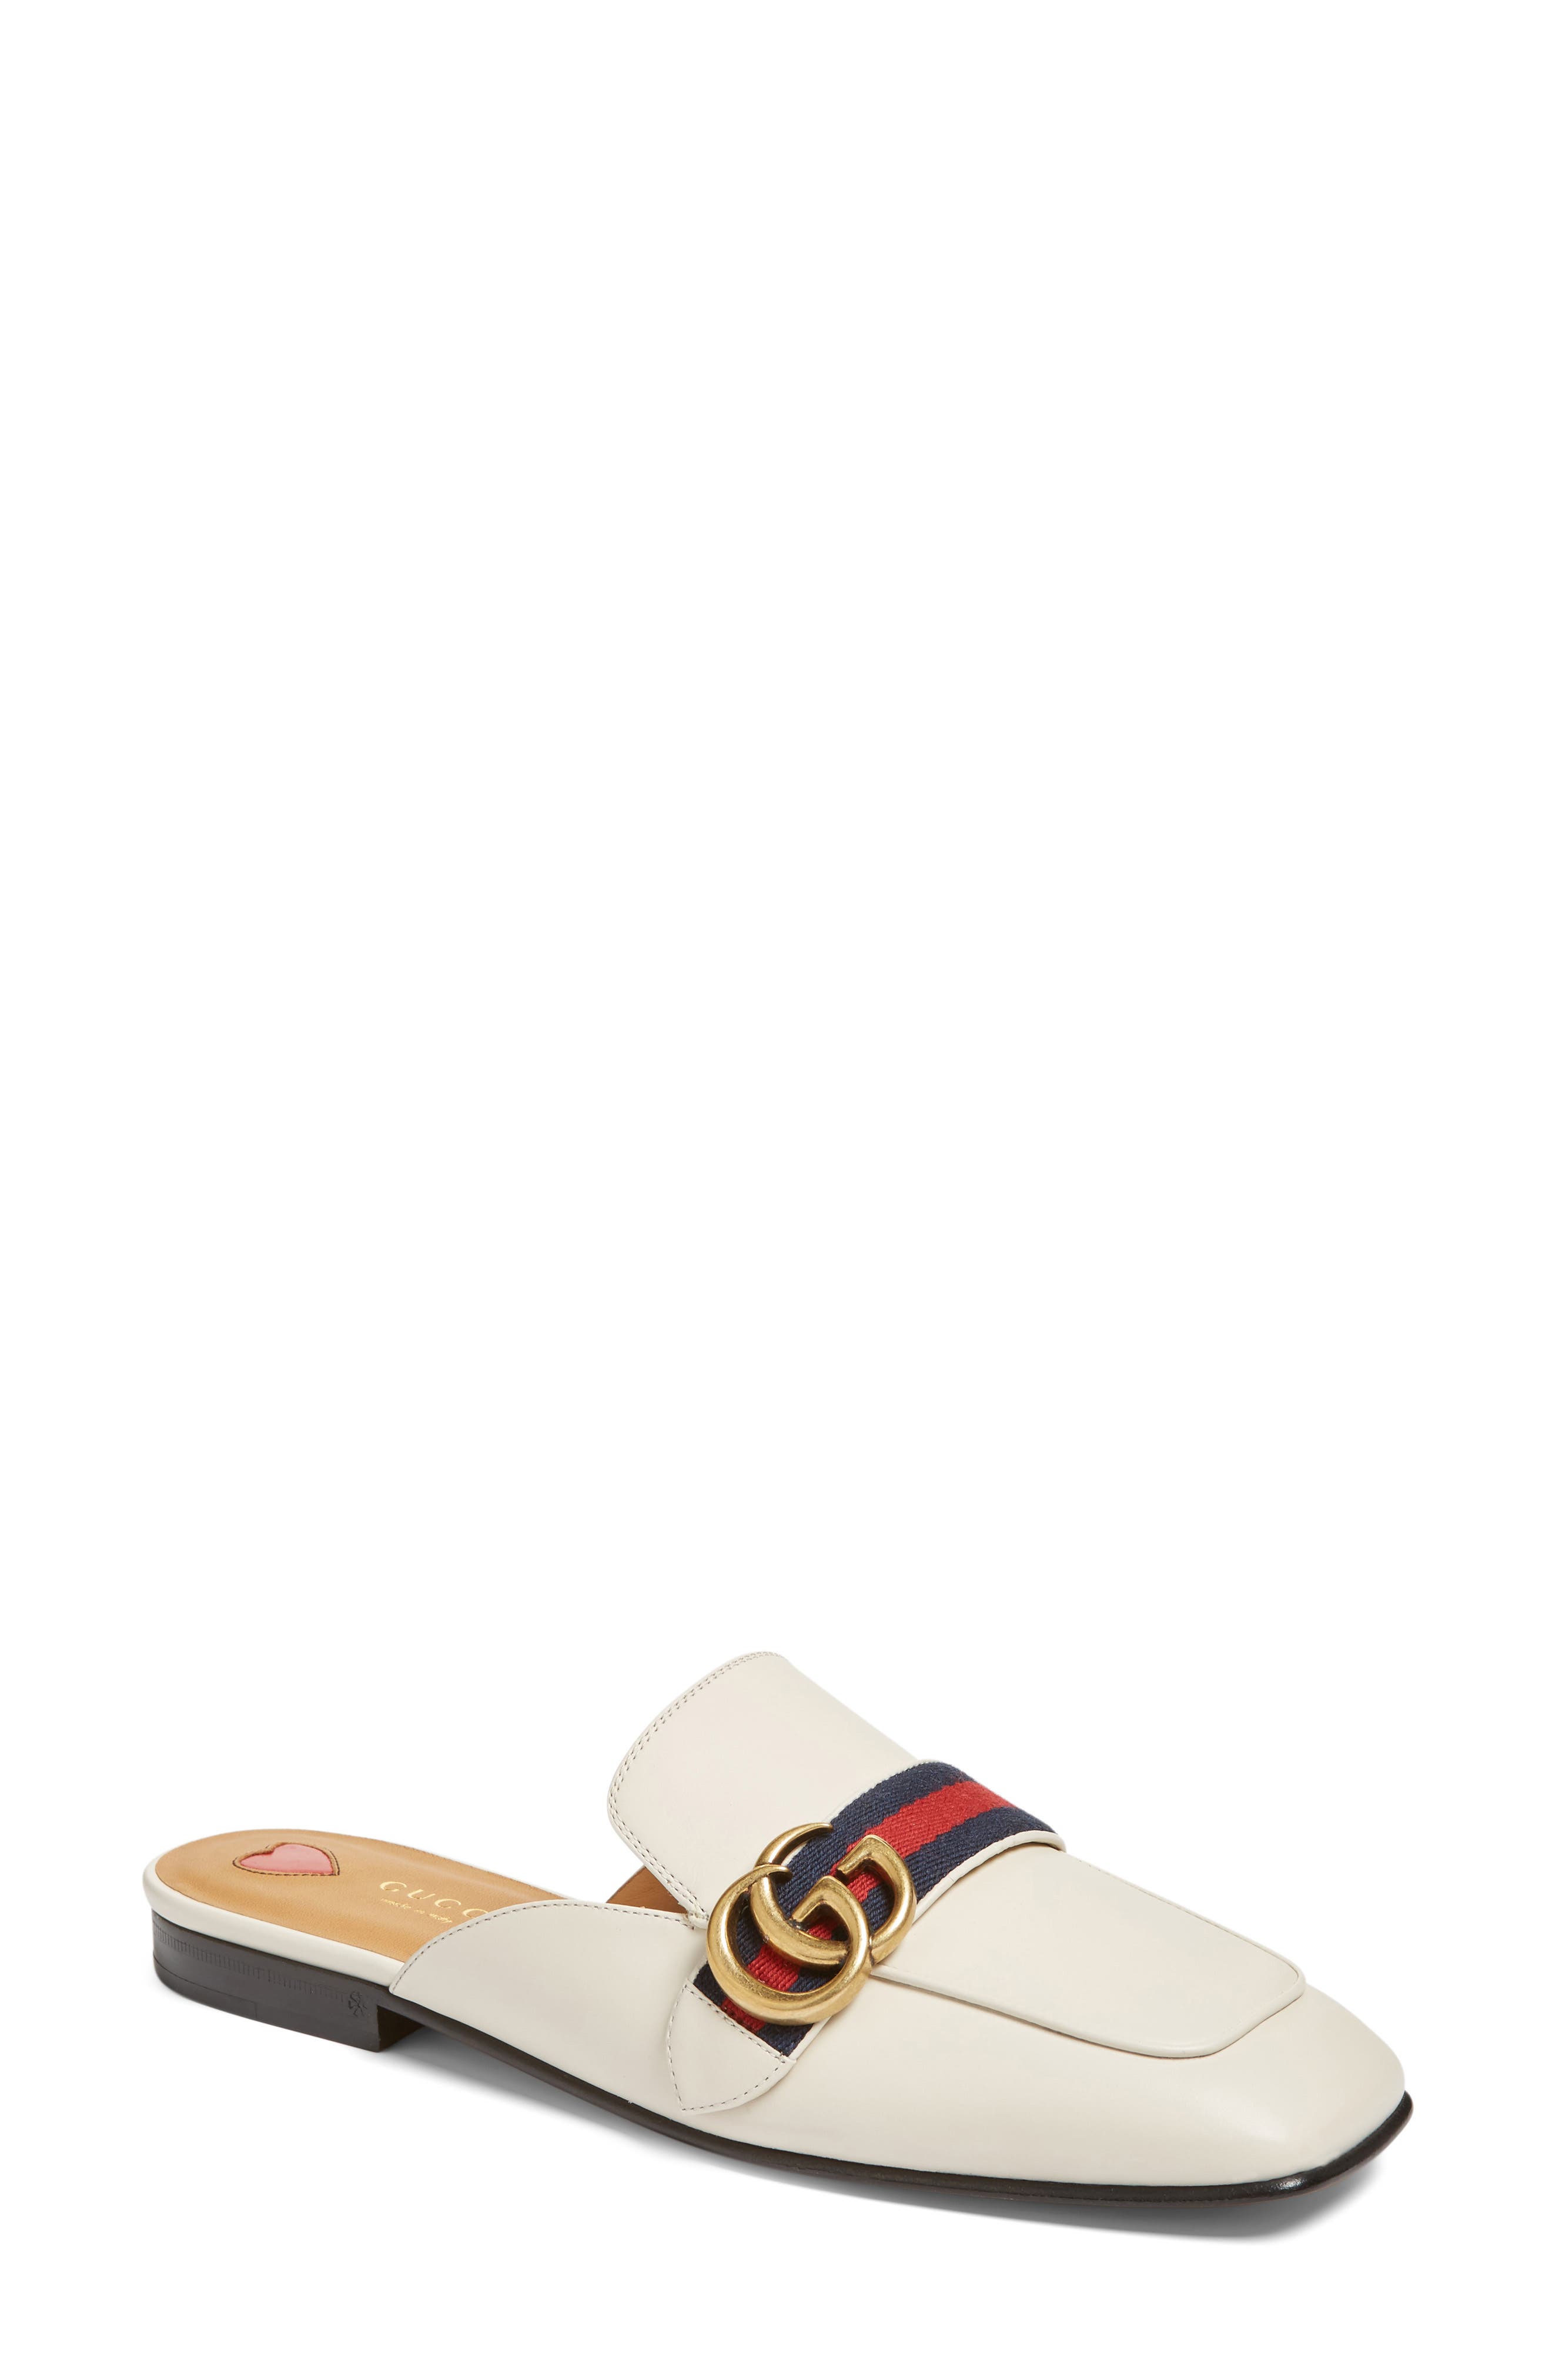 nordstrom gucci mules